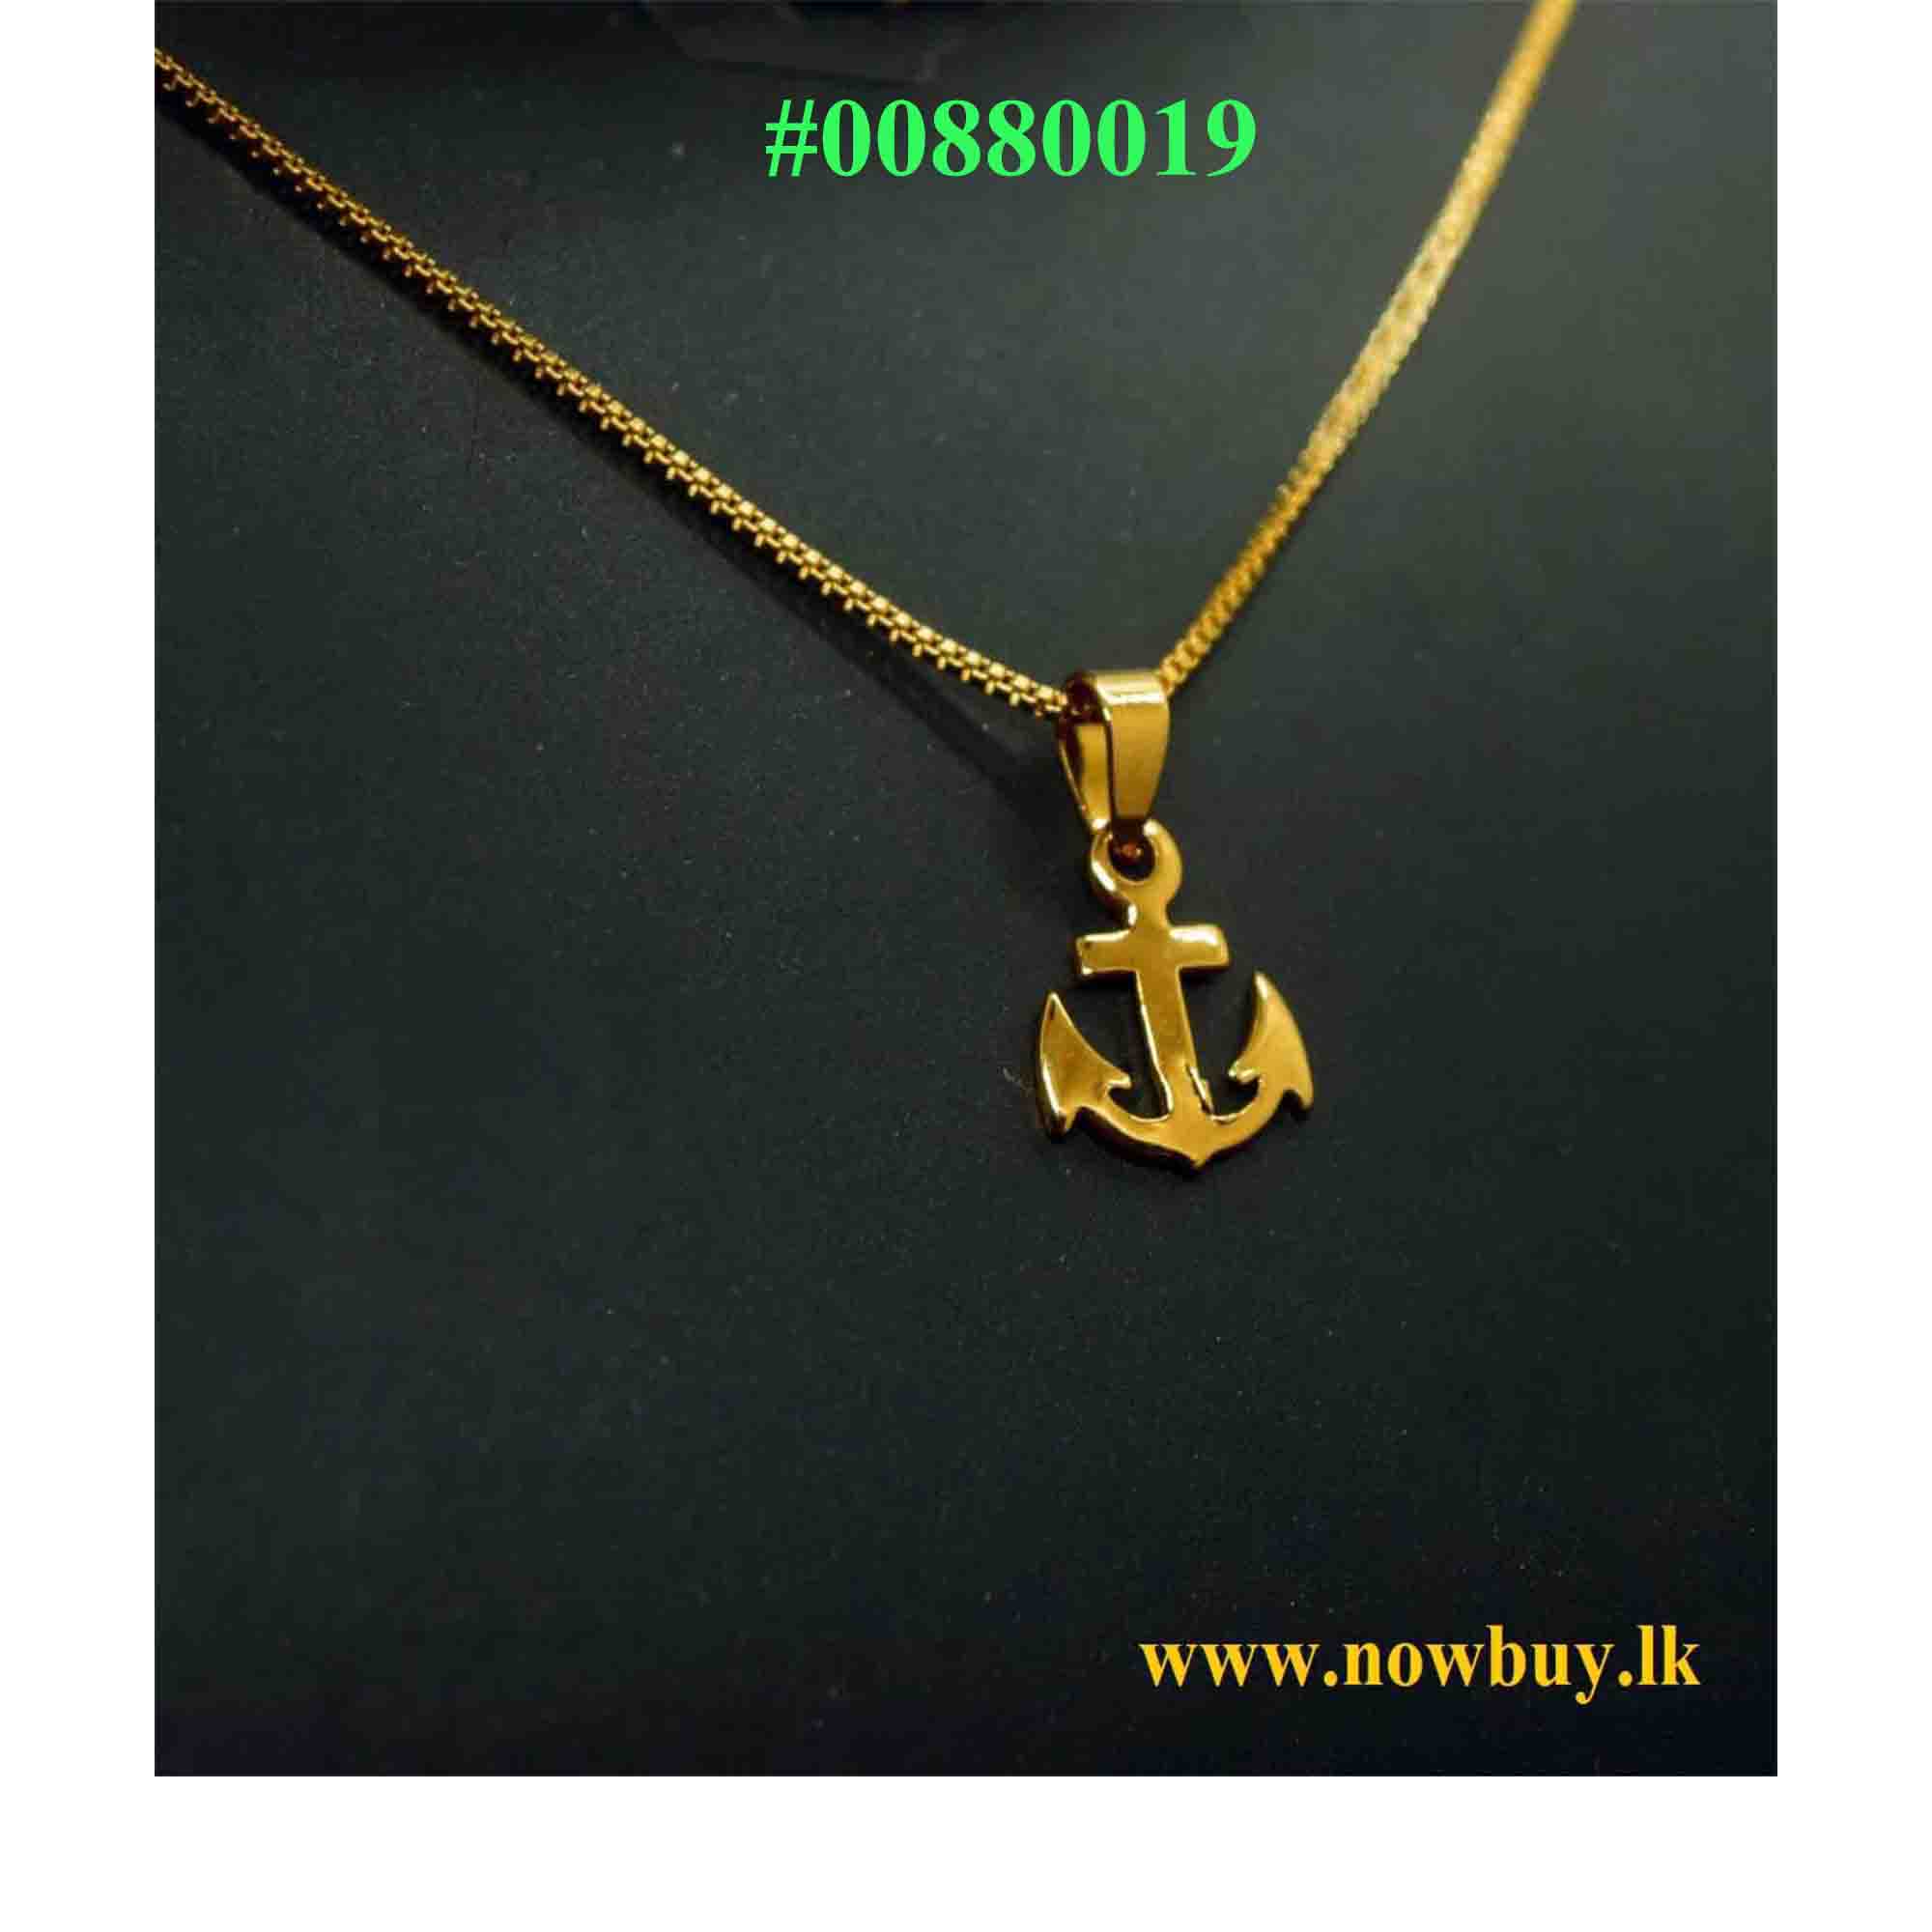 18/24 Inch Short Gold plated 01MM Small BK Box Chain With Small Anchor Pendant (NBLK) Necklaces NowBuy.lk 2